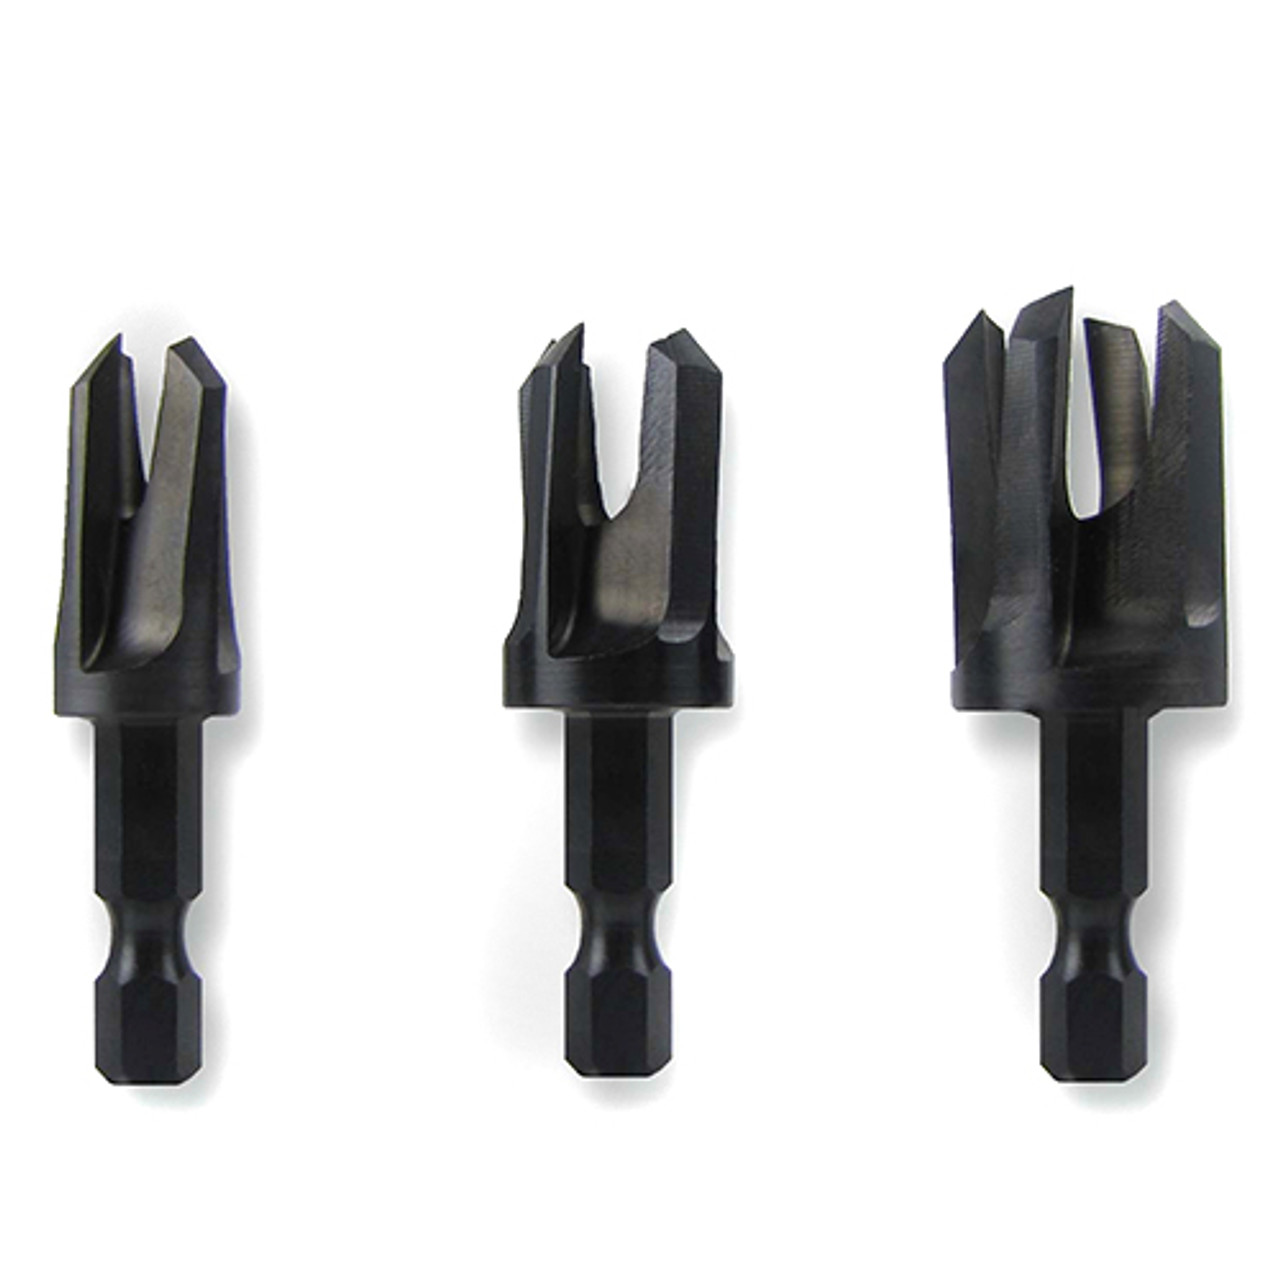 Snappy Tapered Plug Cutter 3pc Set, 1/4", 3/8", 1/2"